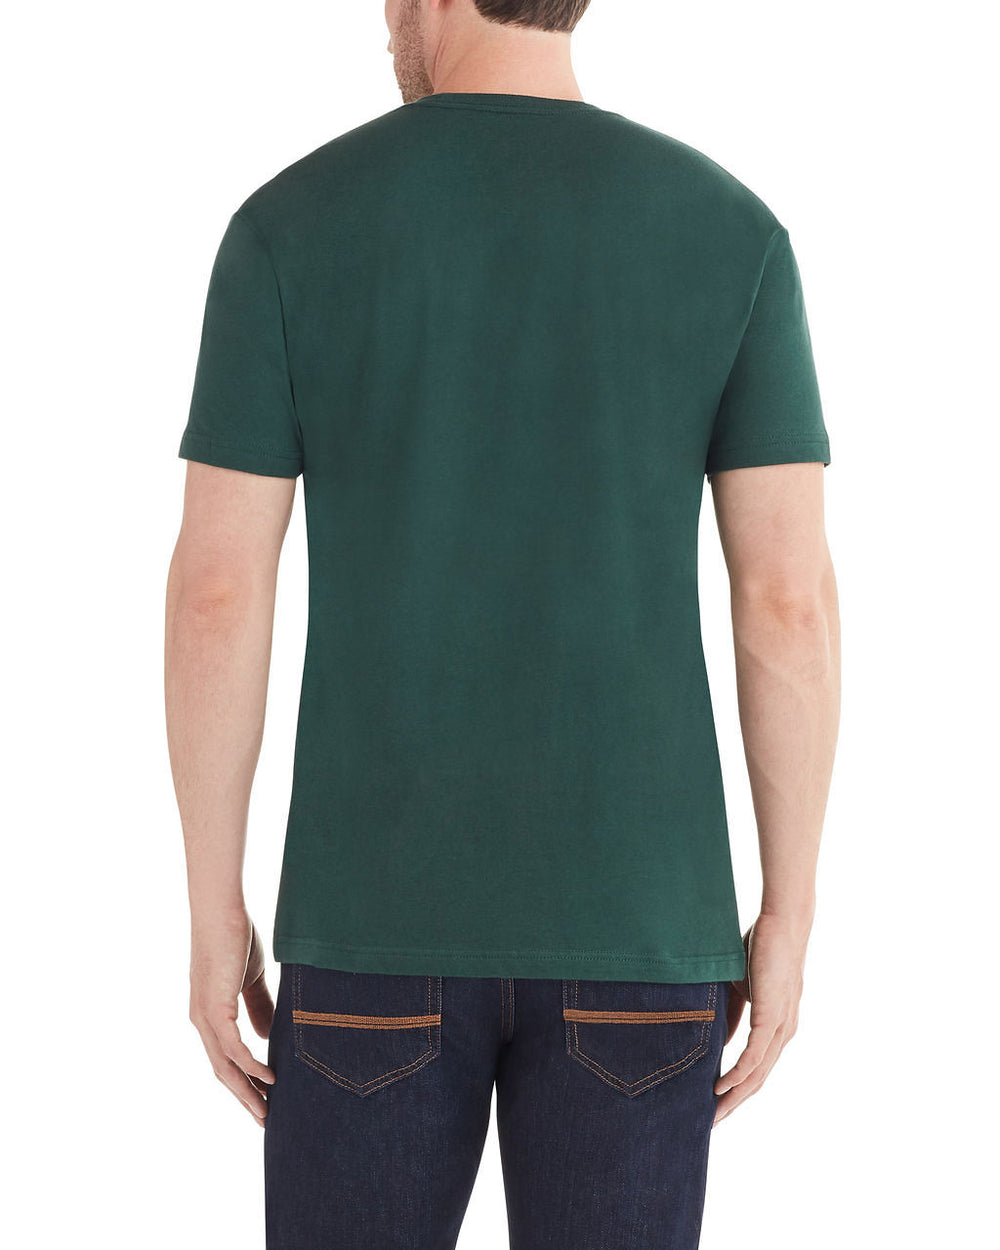 Inner Echo Graphic T-Shirt - Forest Green